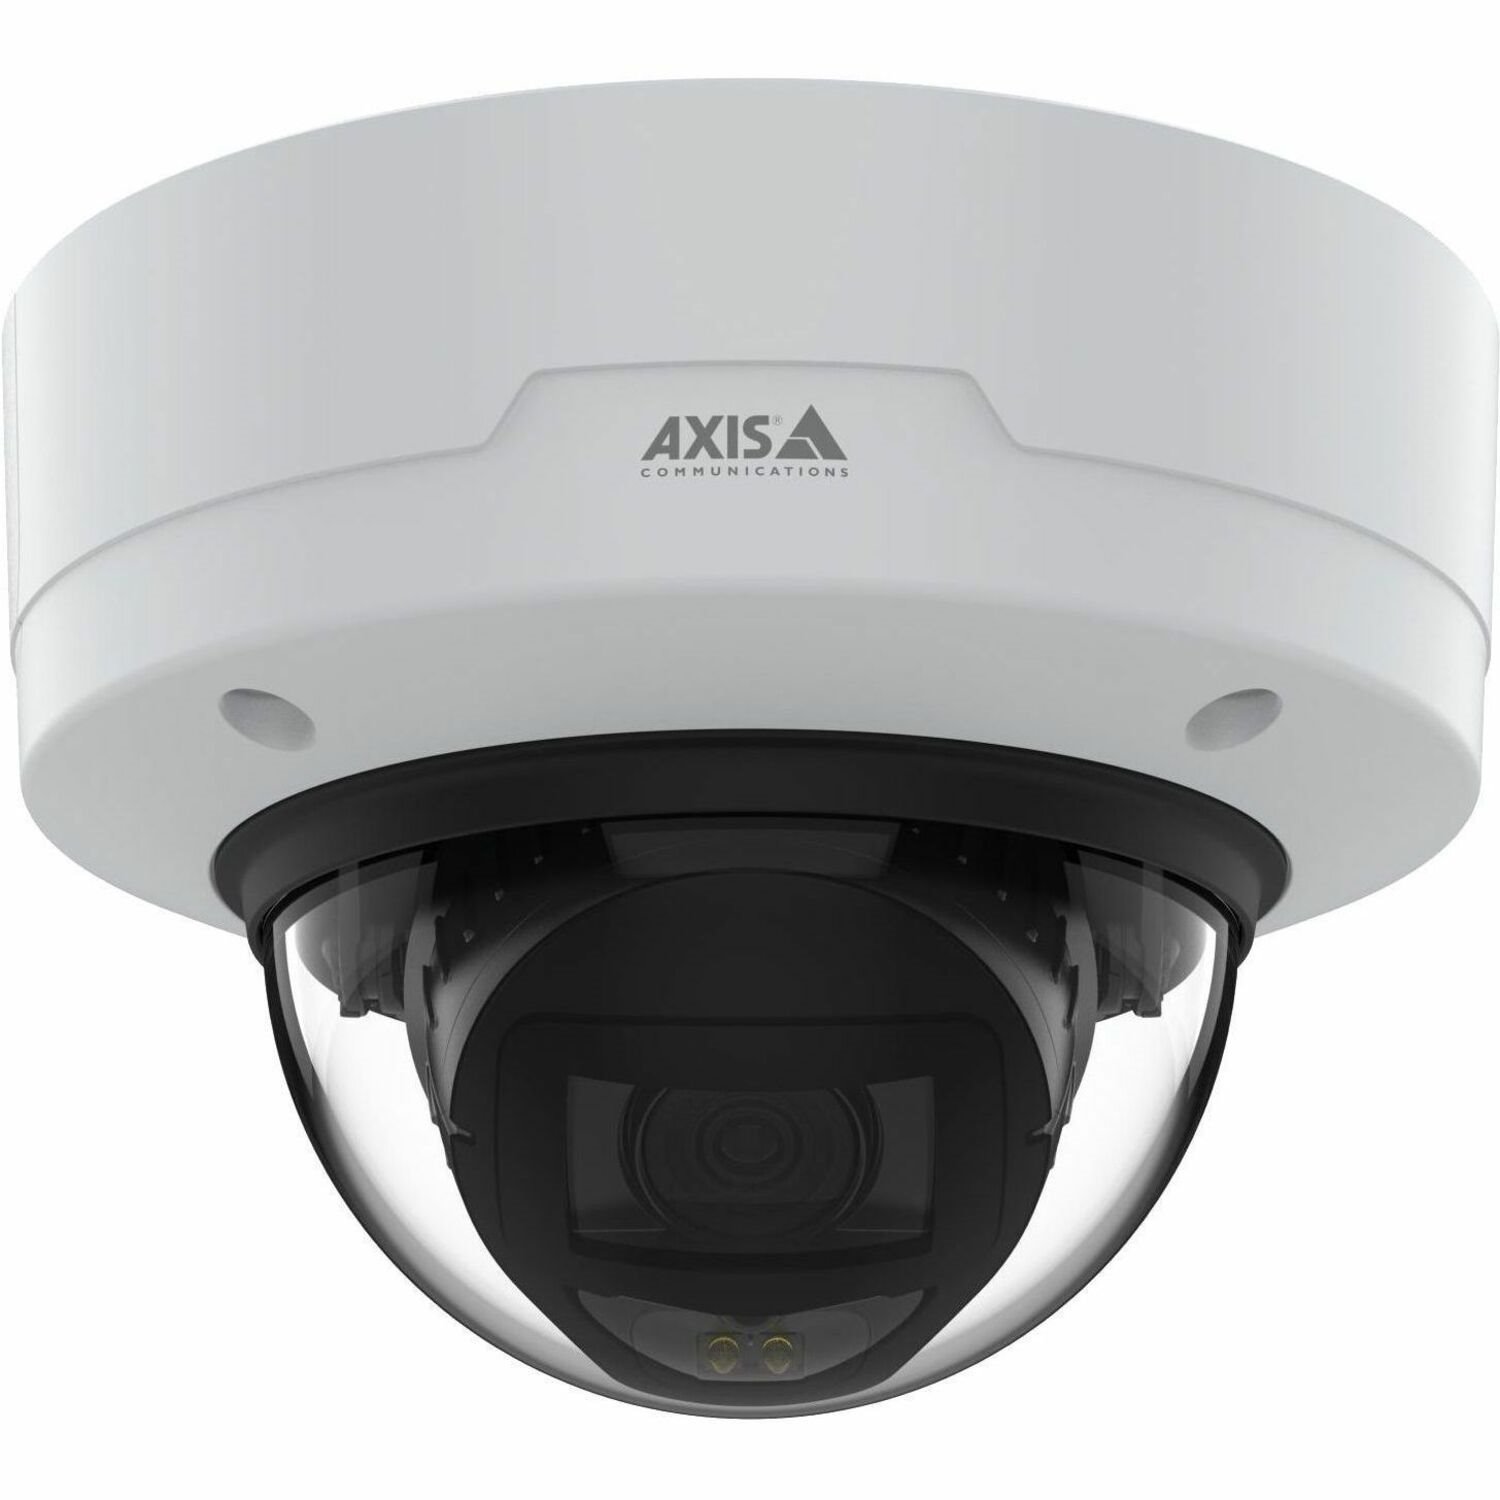 AXIS P3267-LVE 5 Megapixel Outdoor Network Camera - Colour - Dome - TAA Compliant